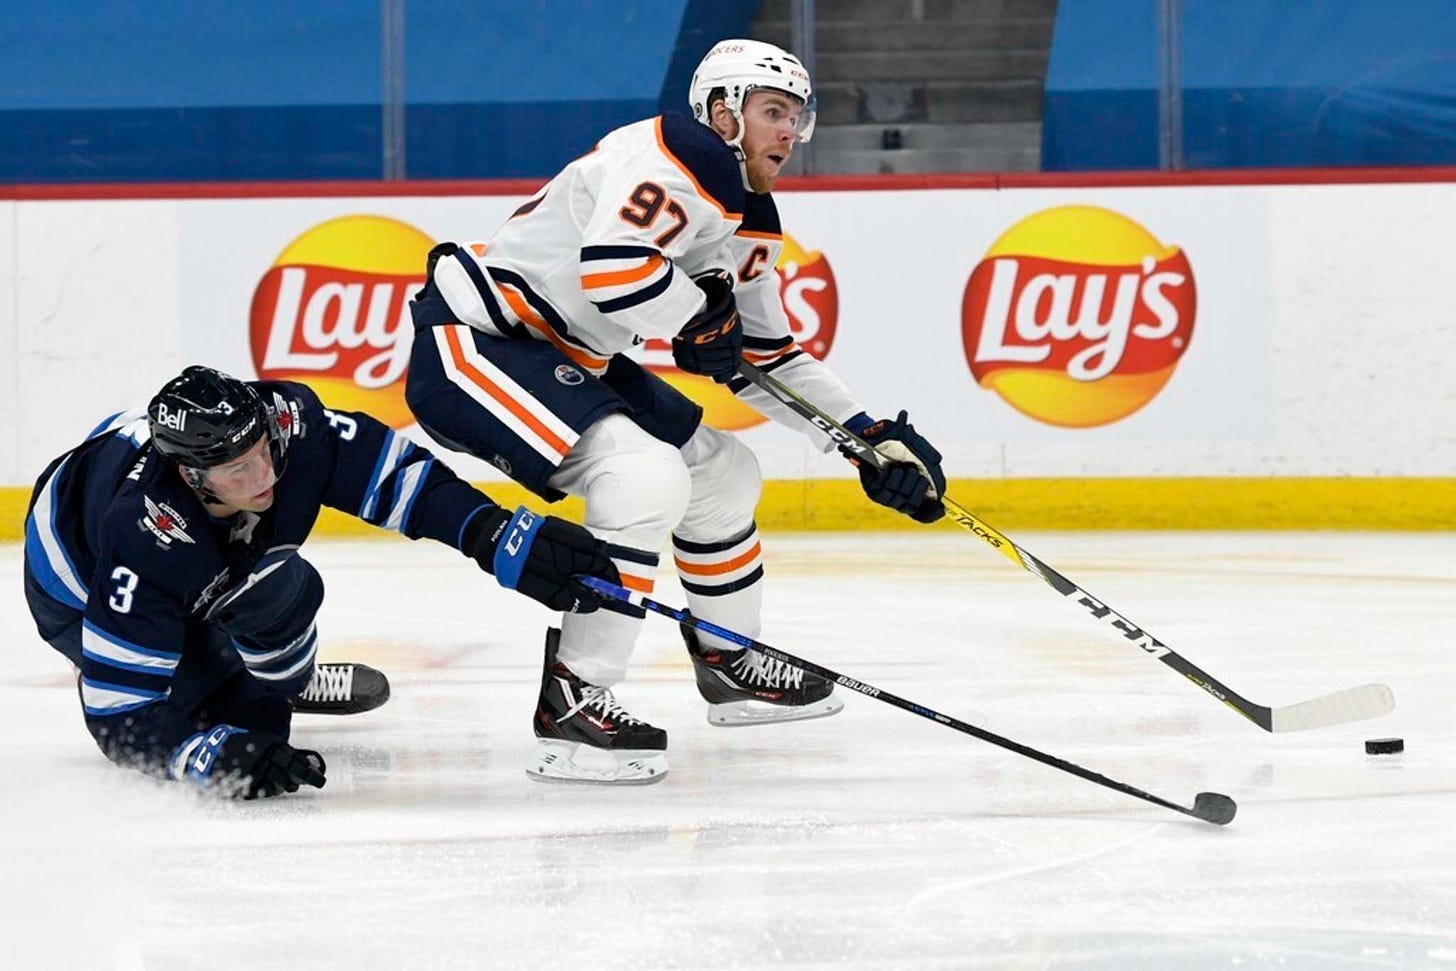 Oilers superstar McDavid scores three times, adds assist in rout of Jets -  Winnipeg Free Press